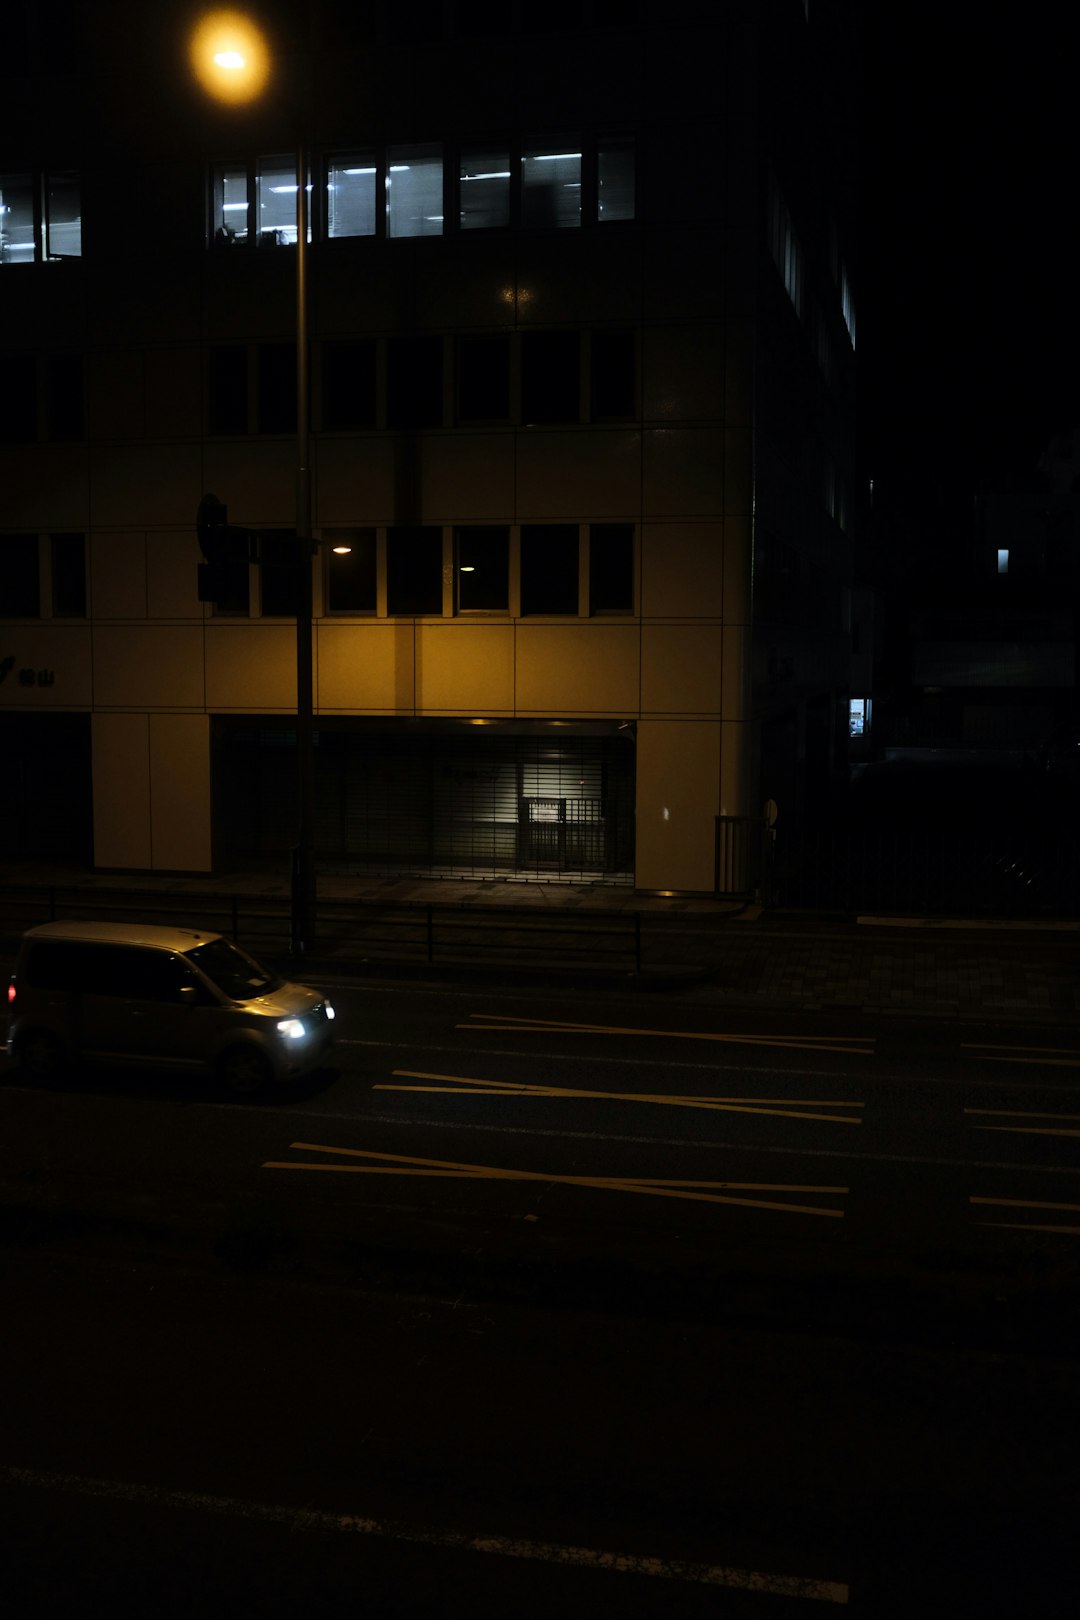 yellow car on road near building during night time